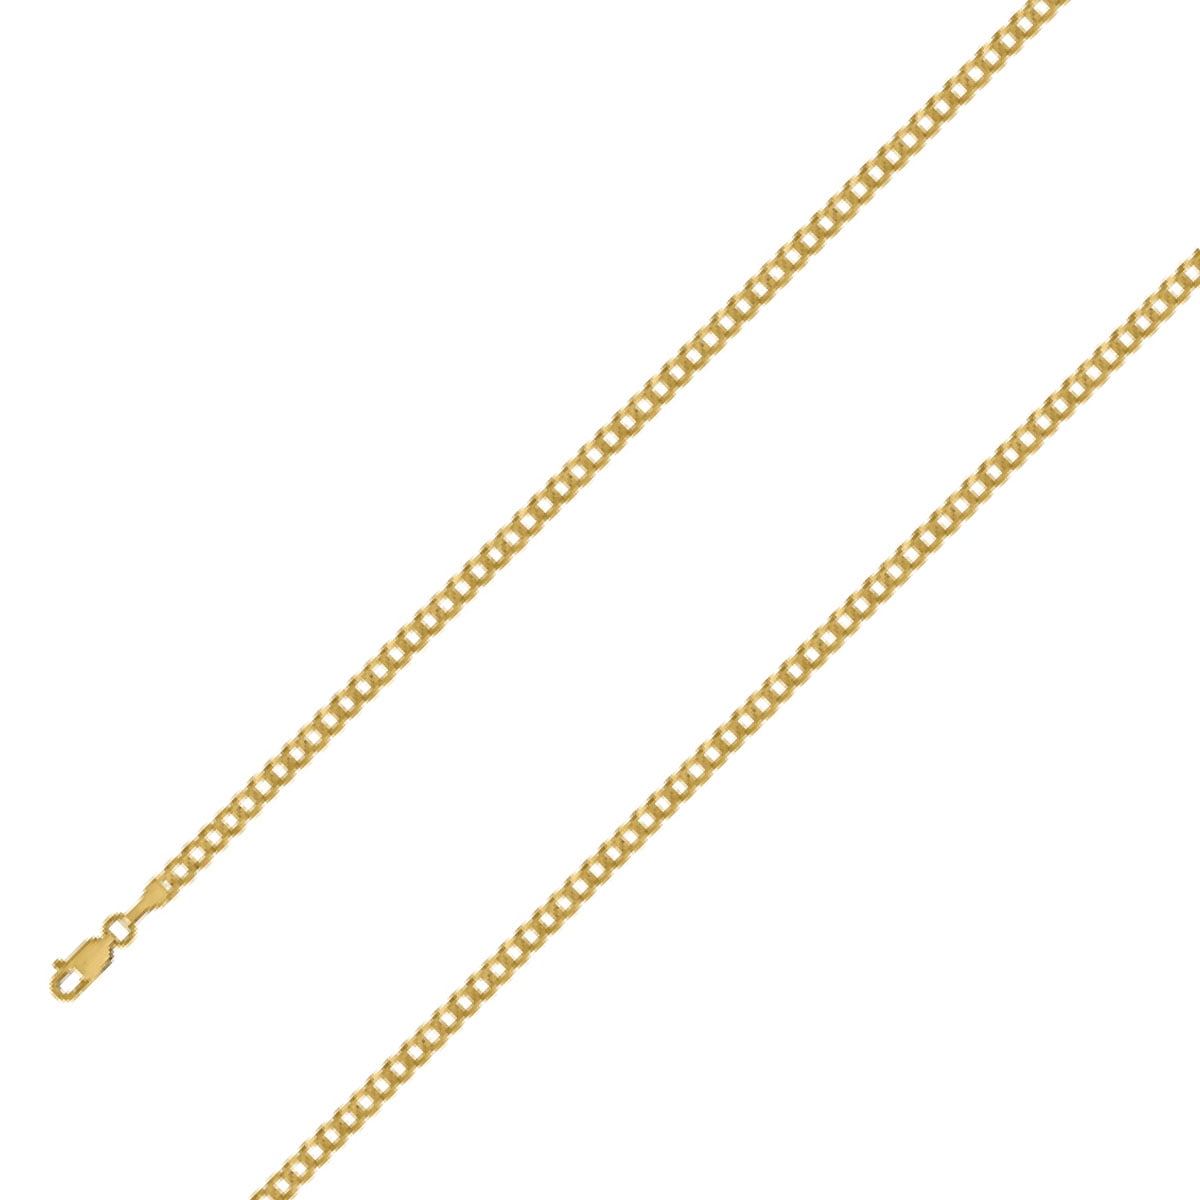 14K Yellow Gold Men's 3.5MM Cuban Link Chains Necklace Lobster Clasp, 18 to 24 Inches (24)